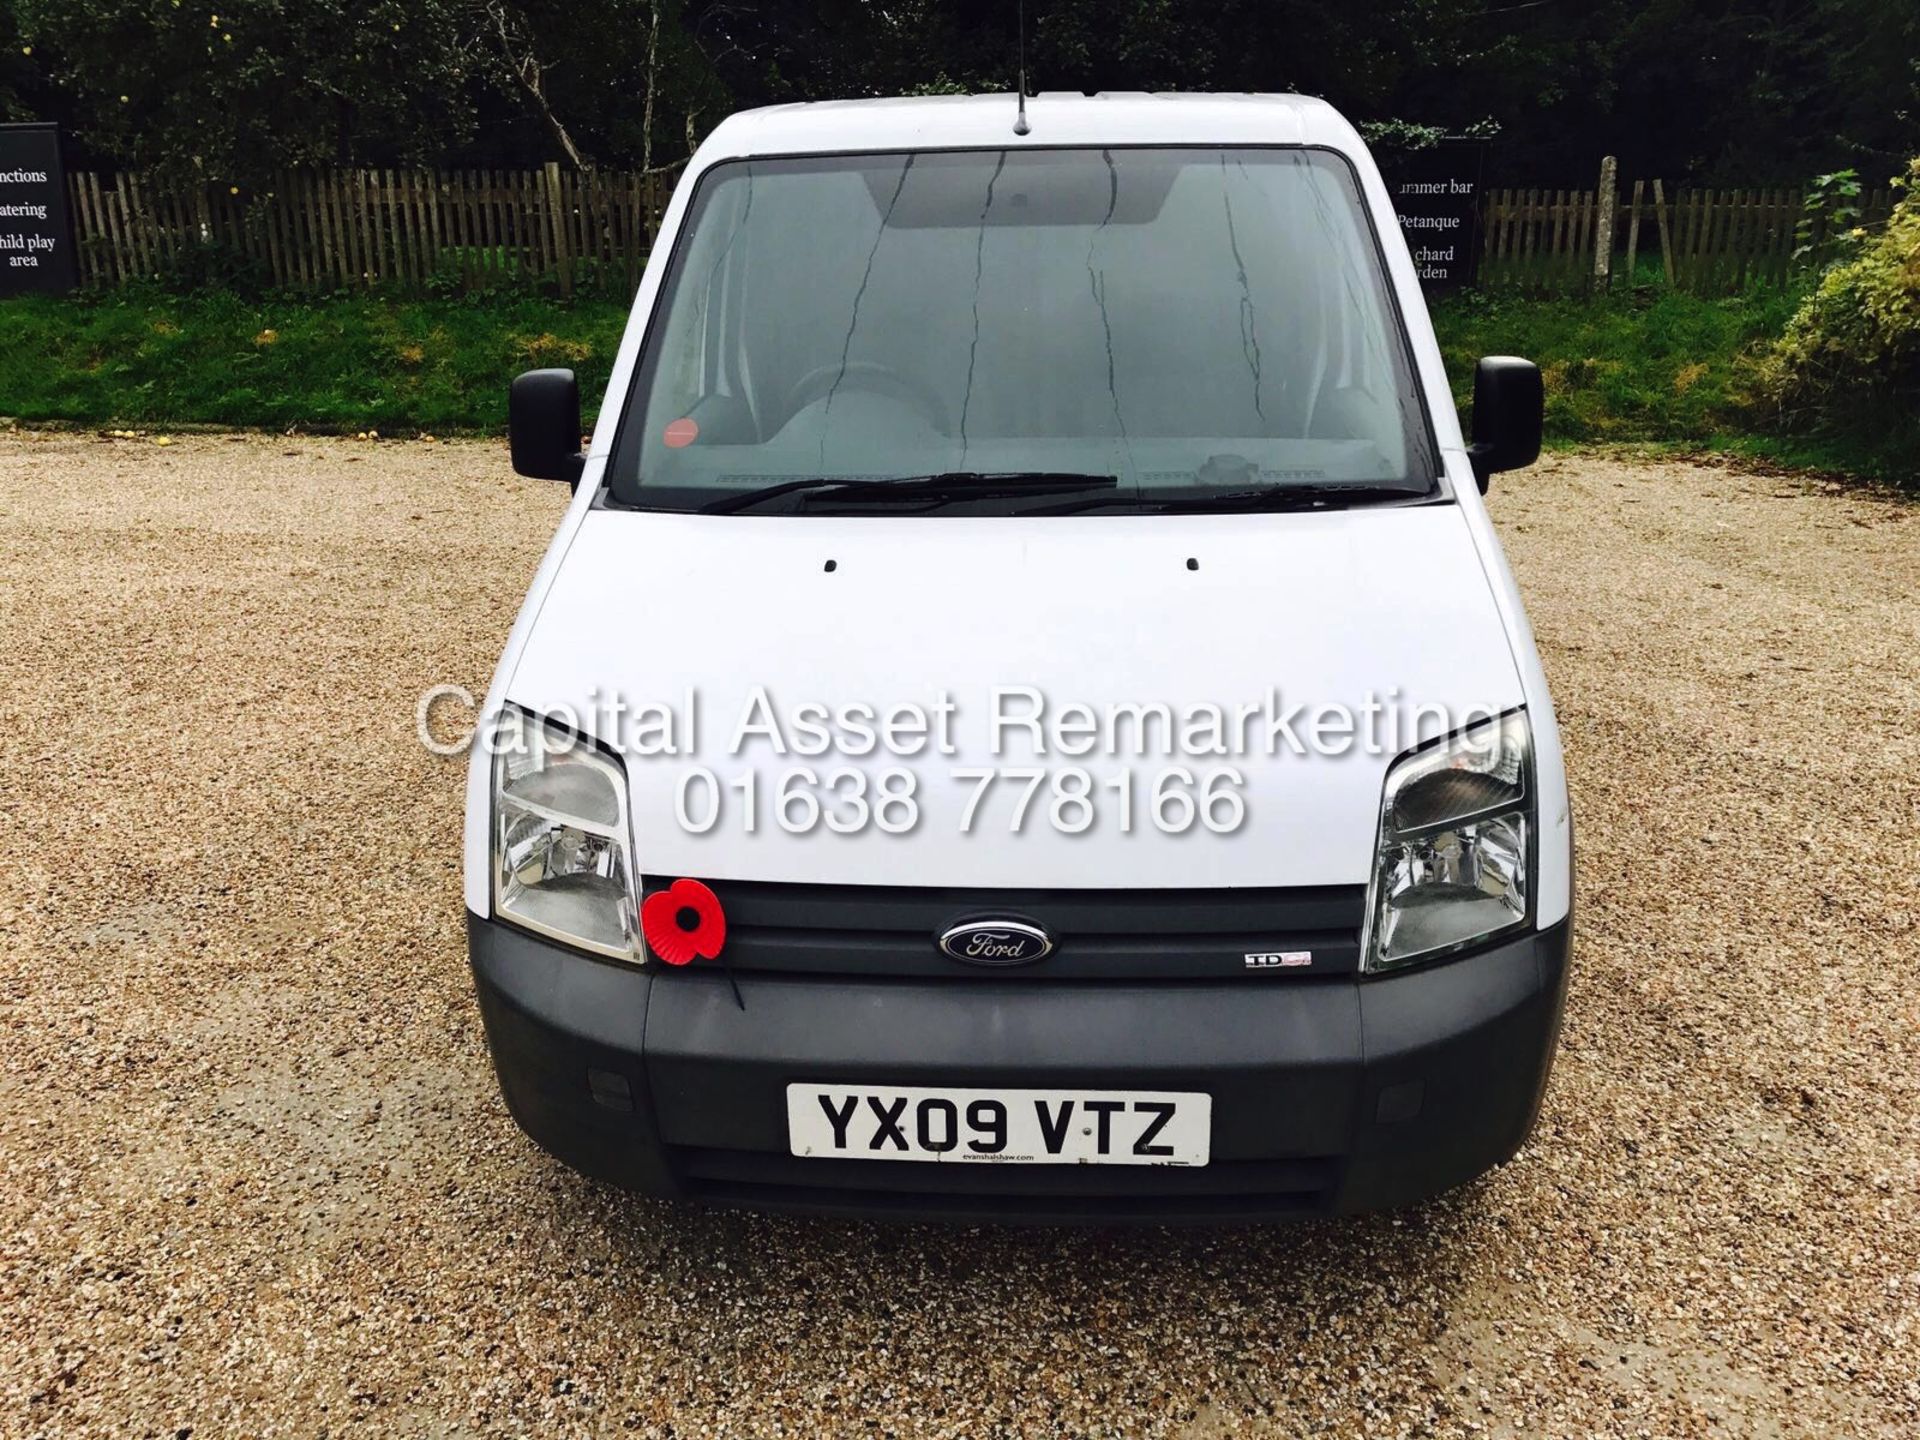 (ON SALE) FORD TRANSIT CONNECT 1.8TDCI T200 (2009-09 REG) ONLY 25,000 MILES, SLD (NO VAT !!) - Image 2 of 13